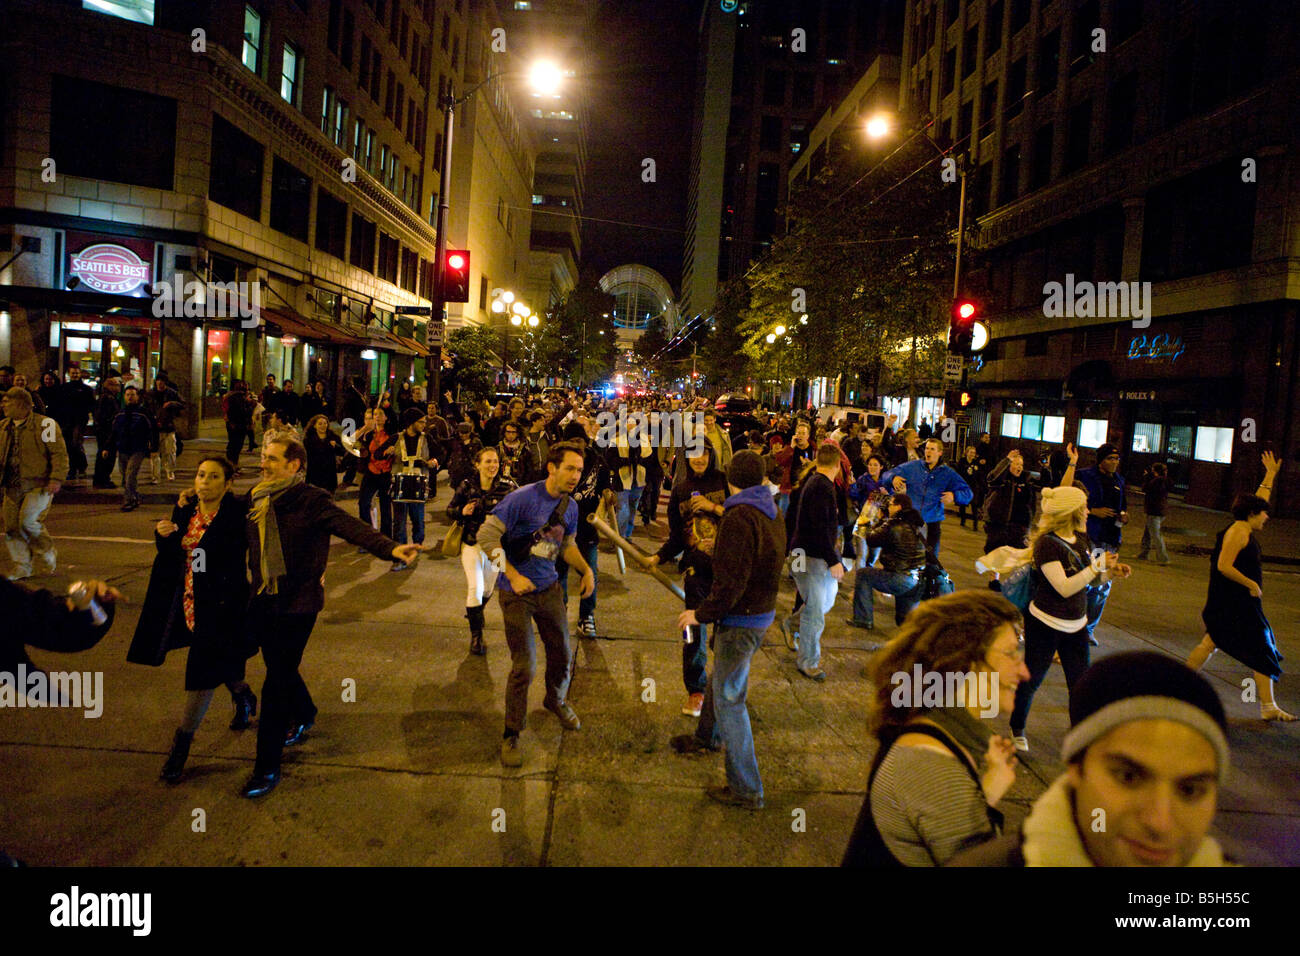 Seattle, 04.11. 2008. People gather spontaneously on the streets of Seattle to celebrate the historic victory of Barack Obama. Stock Photo